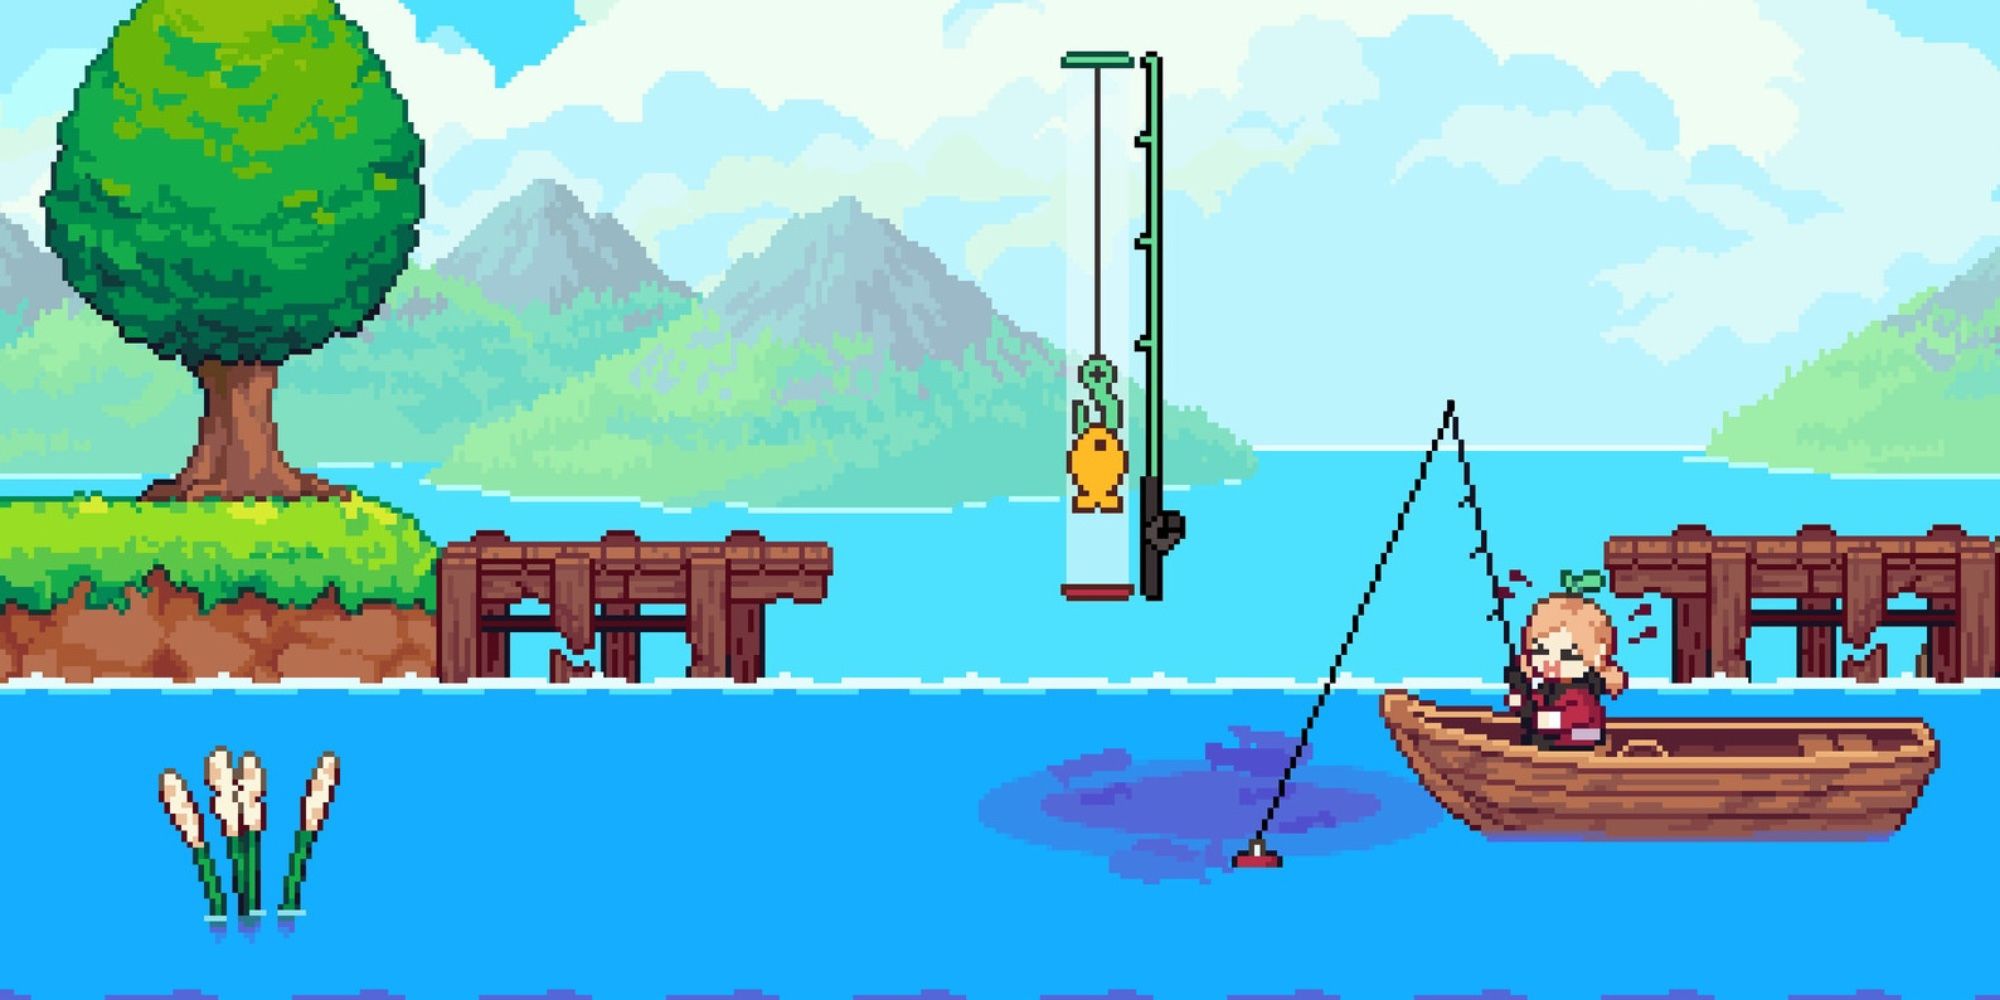 Player collects fish to trade in the game